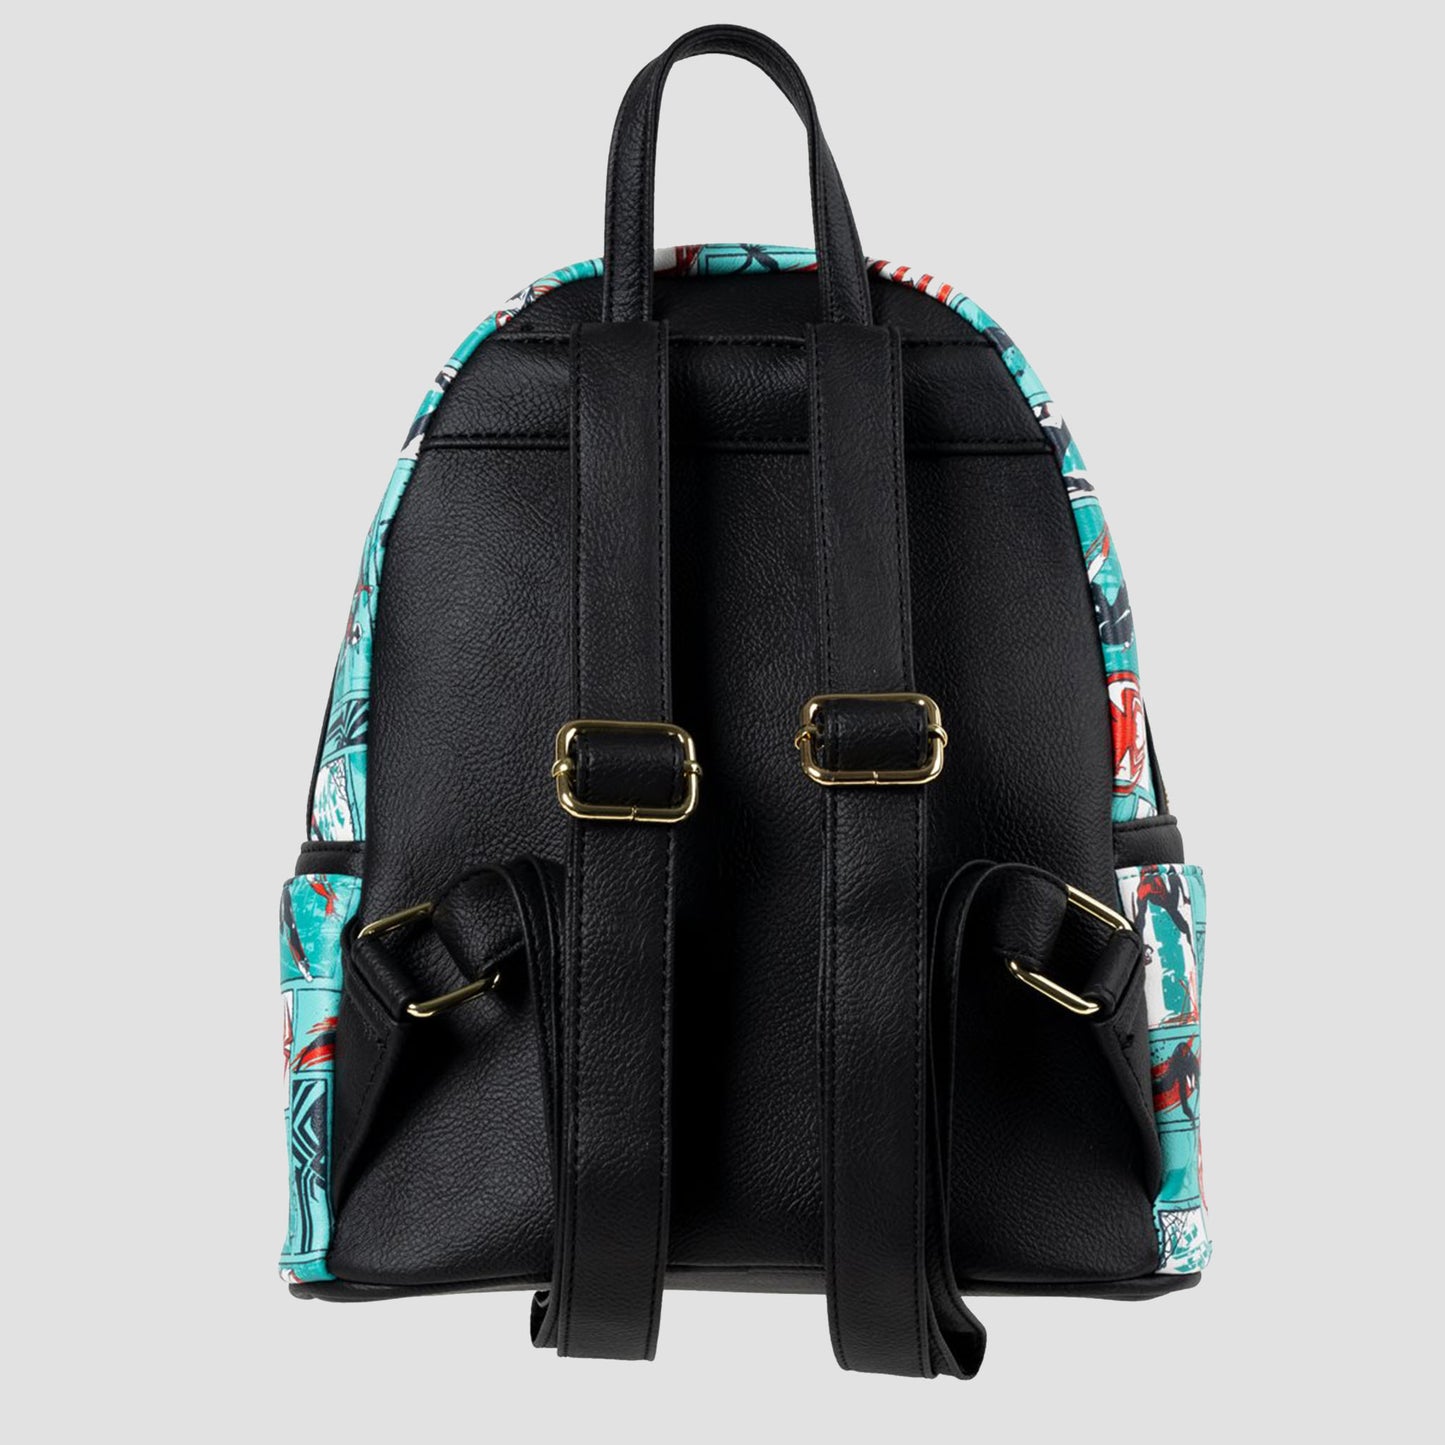 Spider-Man: Across the Spider-Verse Comic Strip (Marvel) EE Exclusive Mini Backpack by Loungefly